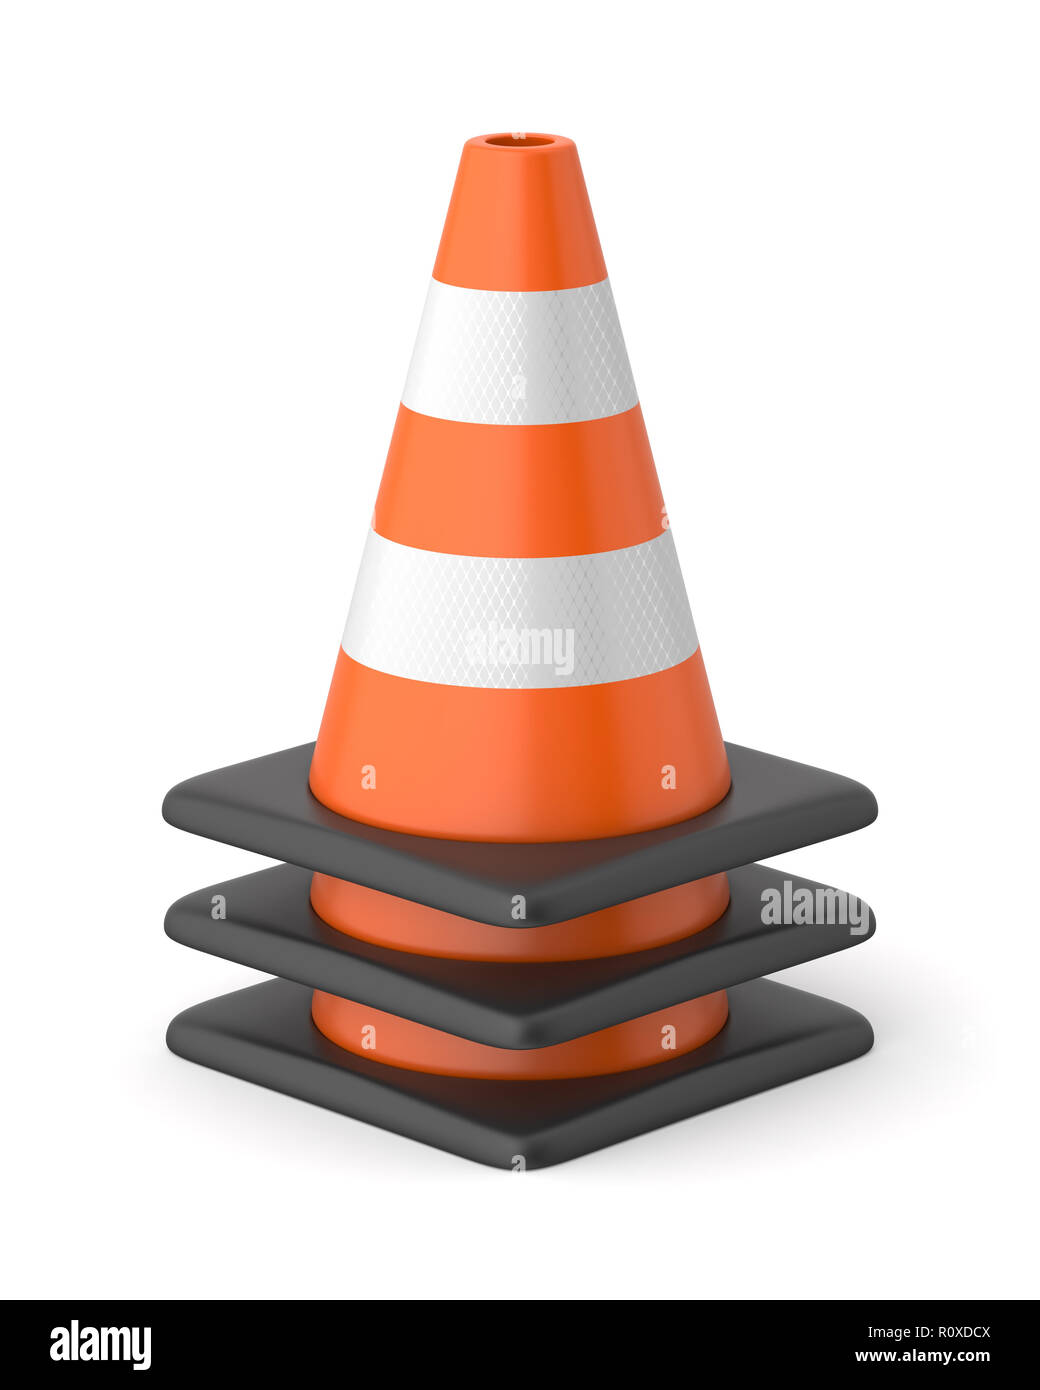 3d rendered stack of orange, black and white striped traffic cones on a white background. Stock Photo